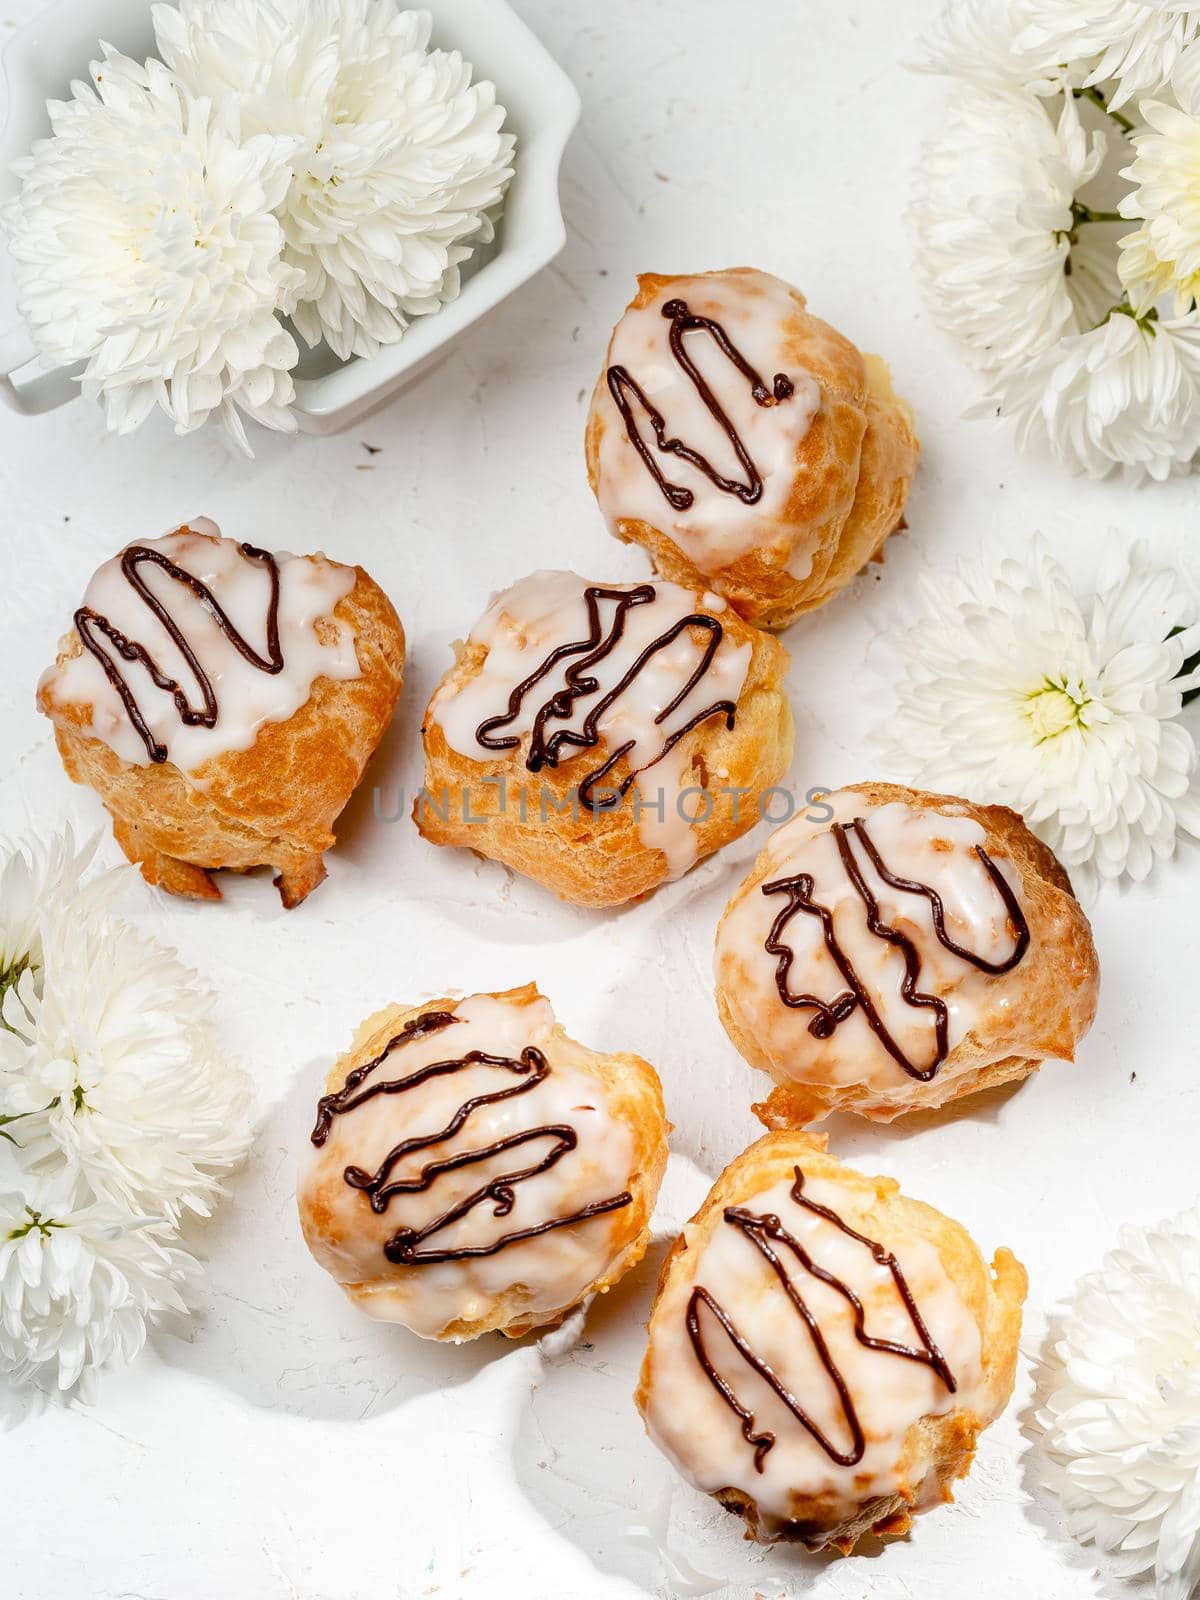 Profiteroles filled with custard on white table by Syvanych